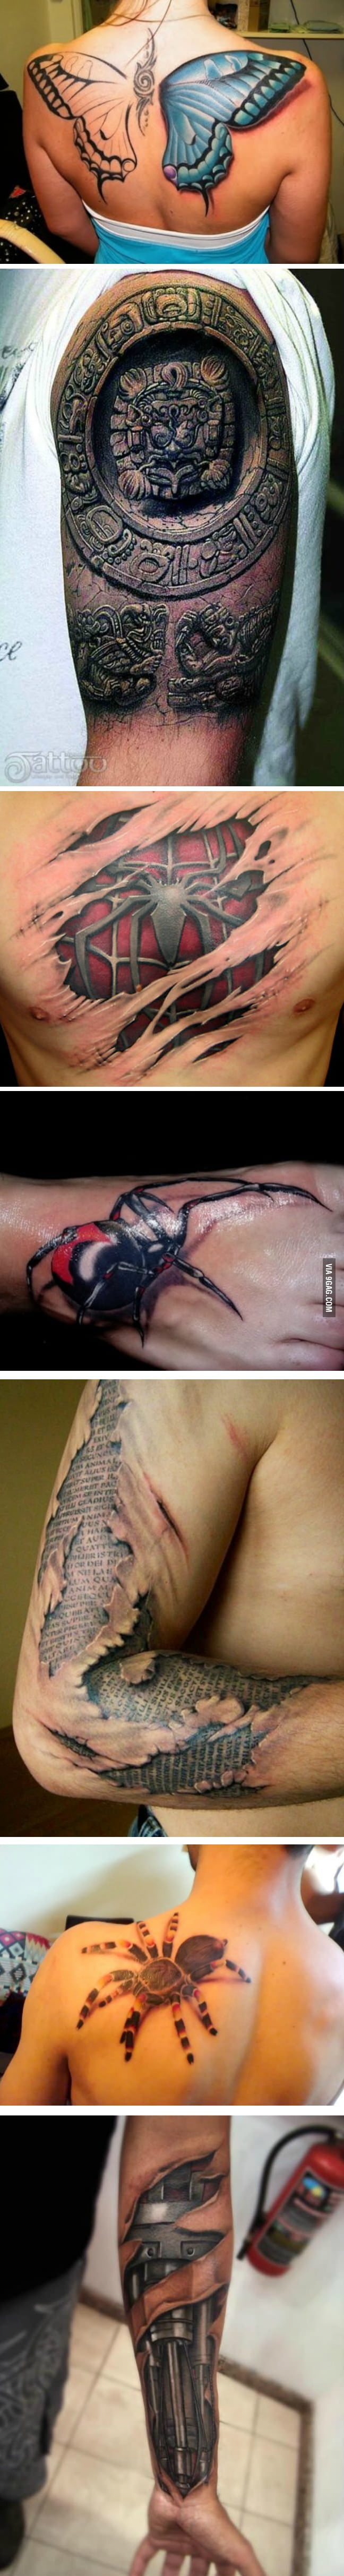 Awesome 3D tattoos